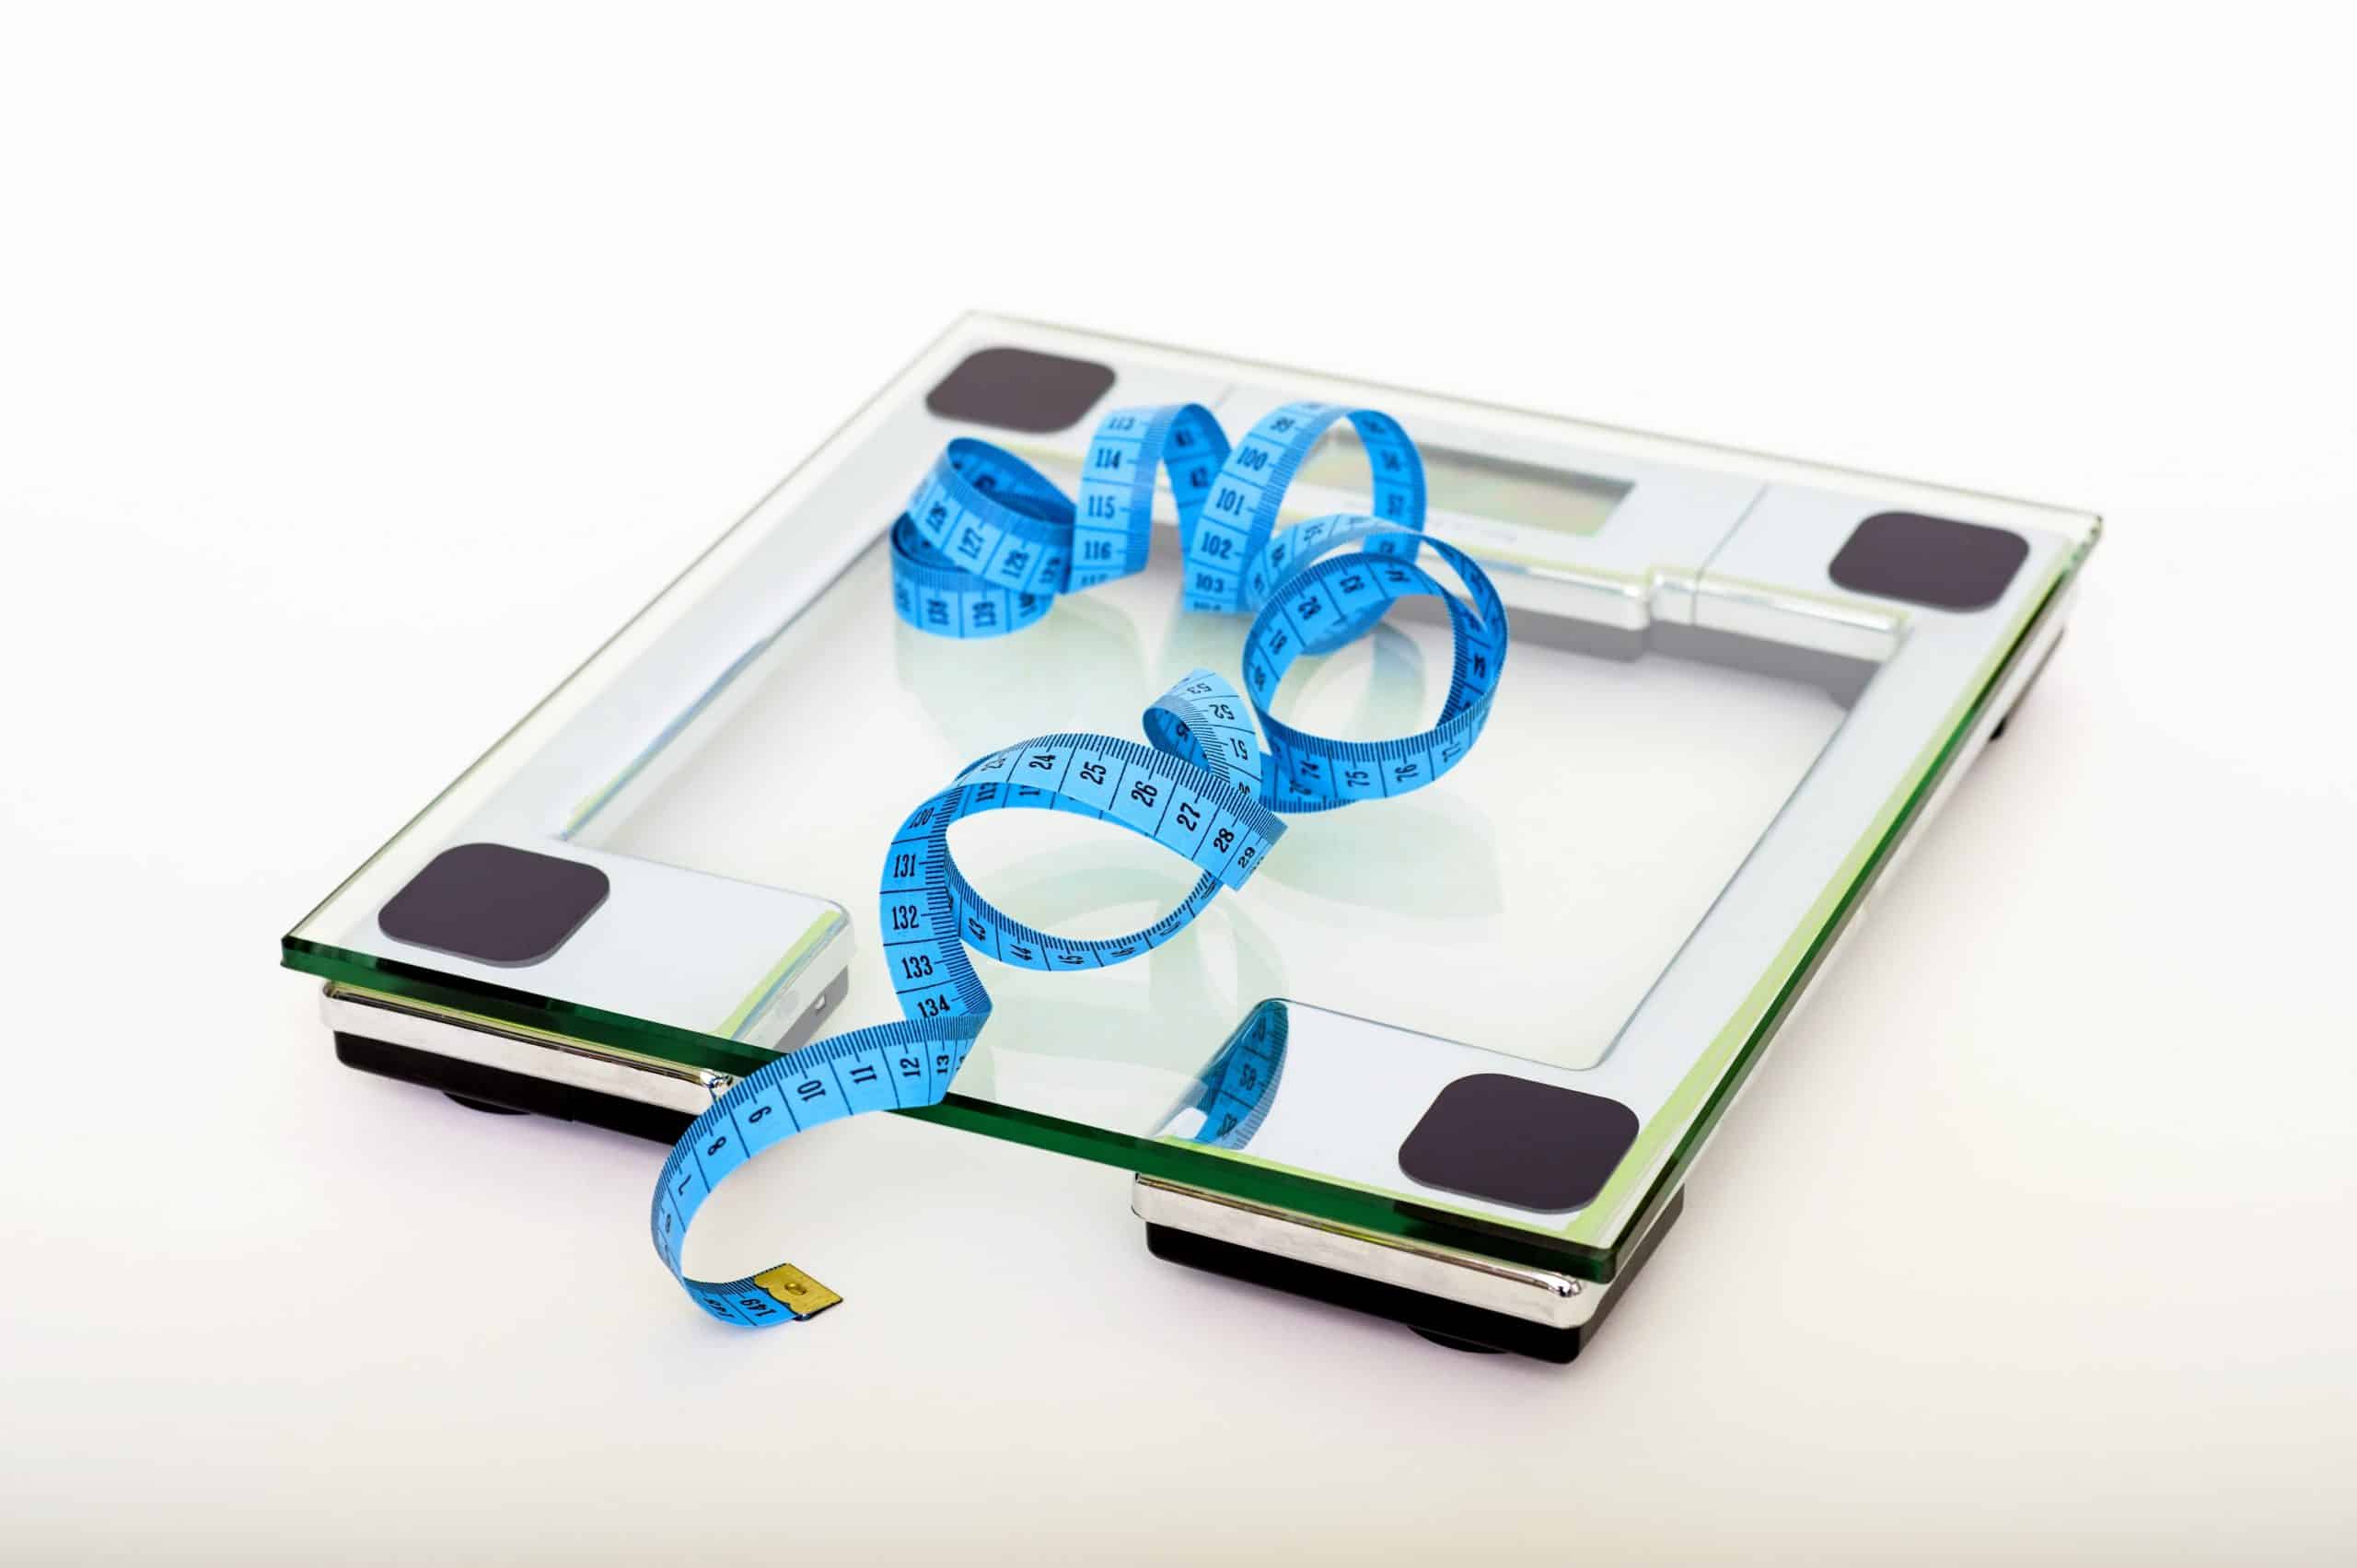 Losing weight on the weighing scale and measure